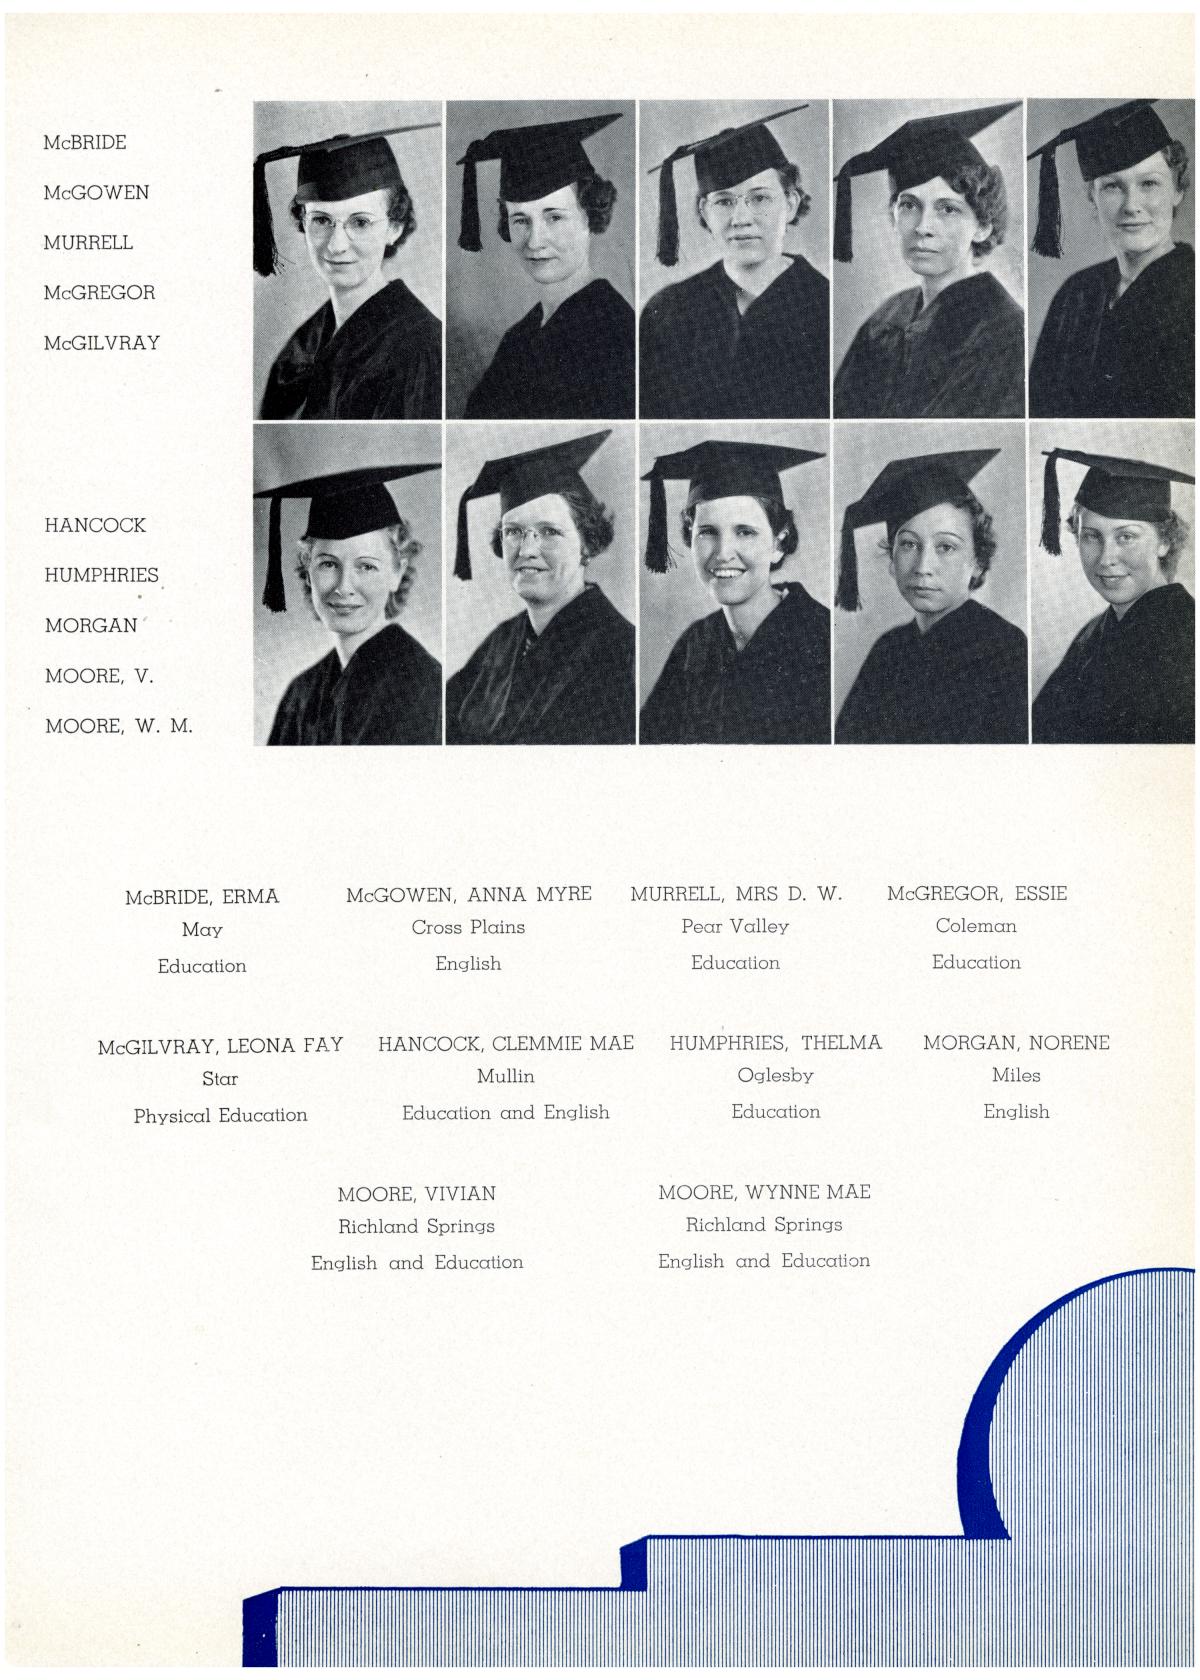 The Lasso, Yearbook of Howard Payne College, 1937
                                                
                                                    44
                                                